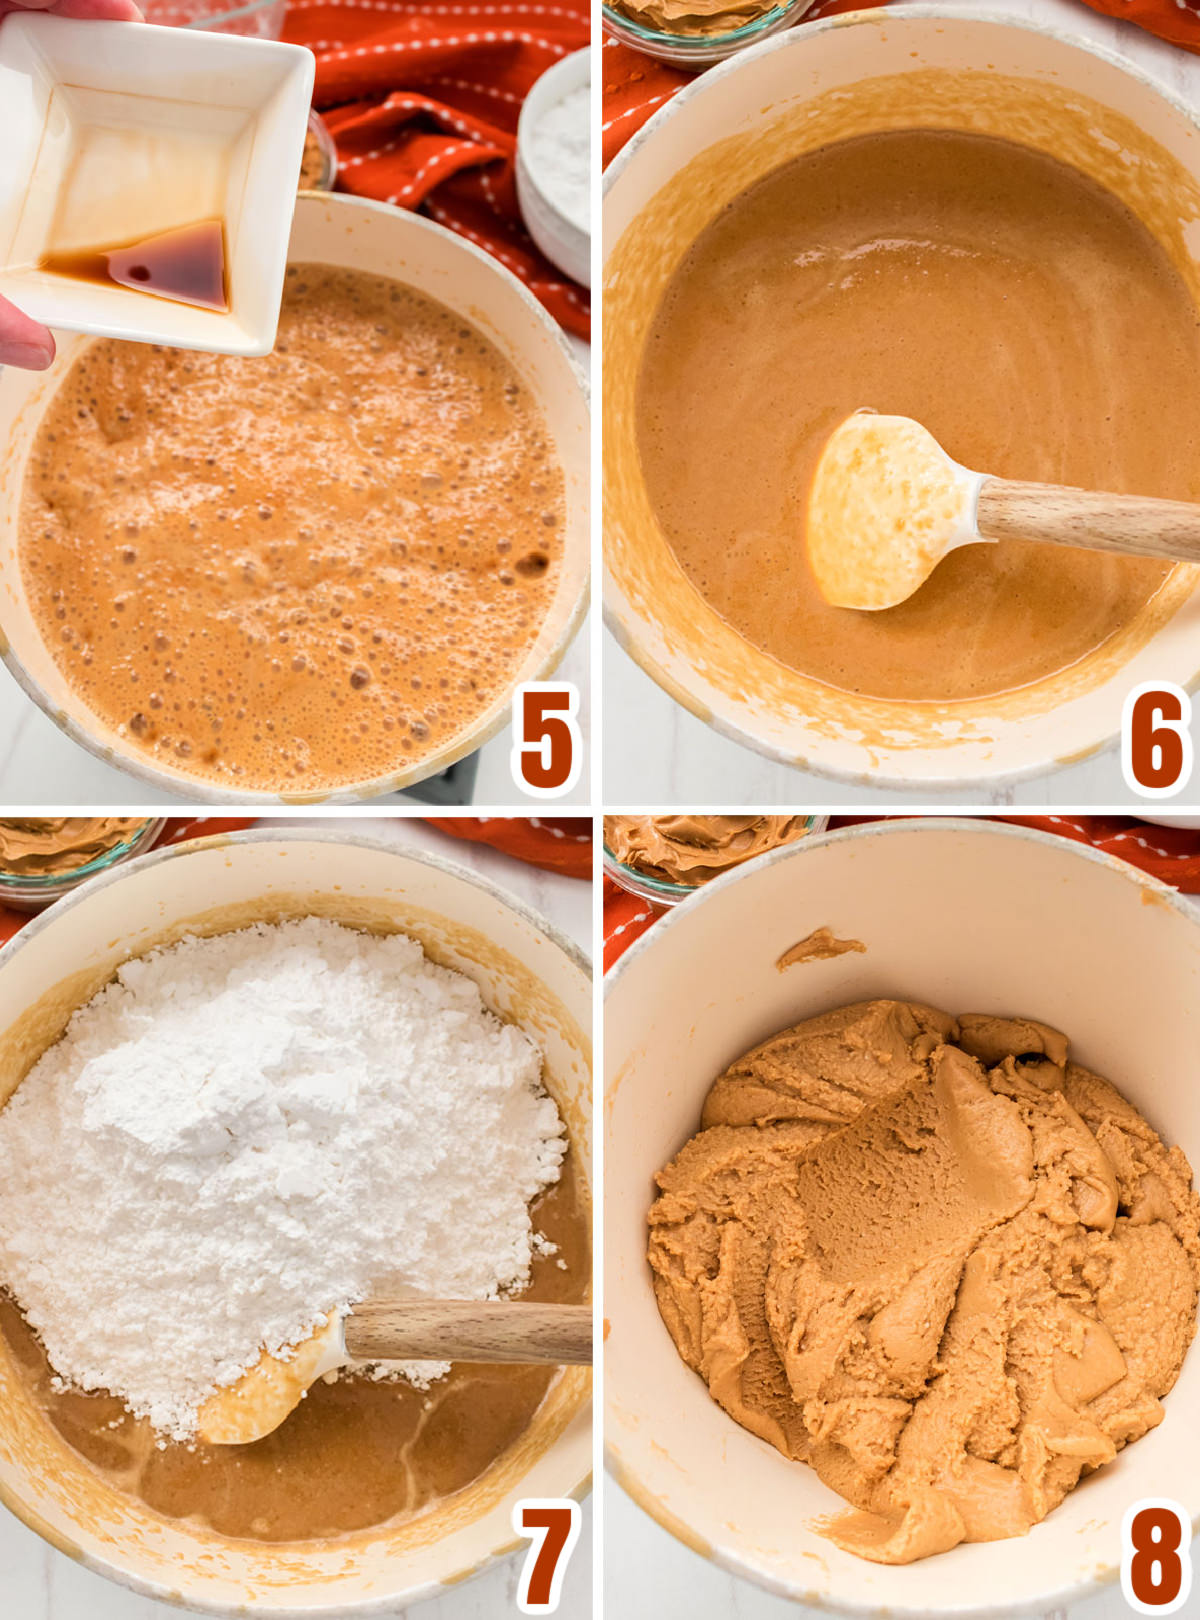 Collage image showing the steps for making the Peanut Butter Fudge mixture.